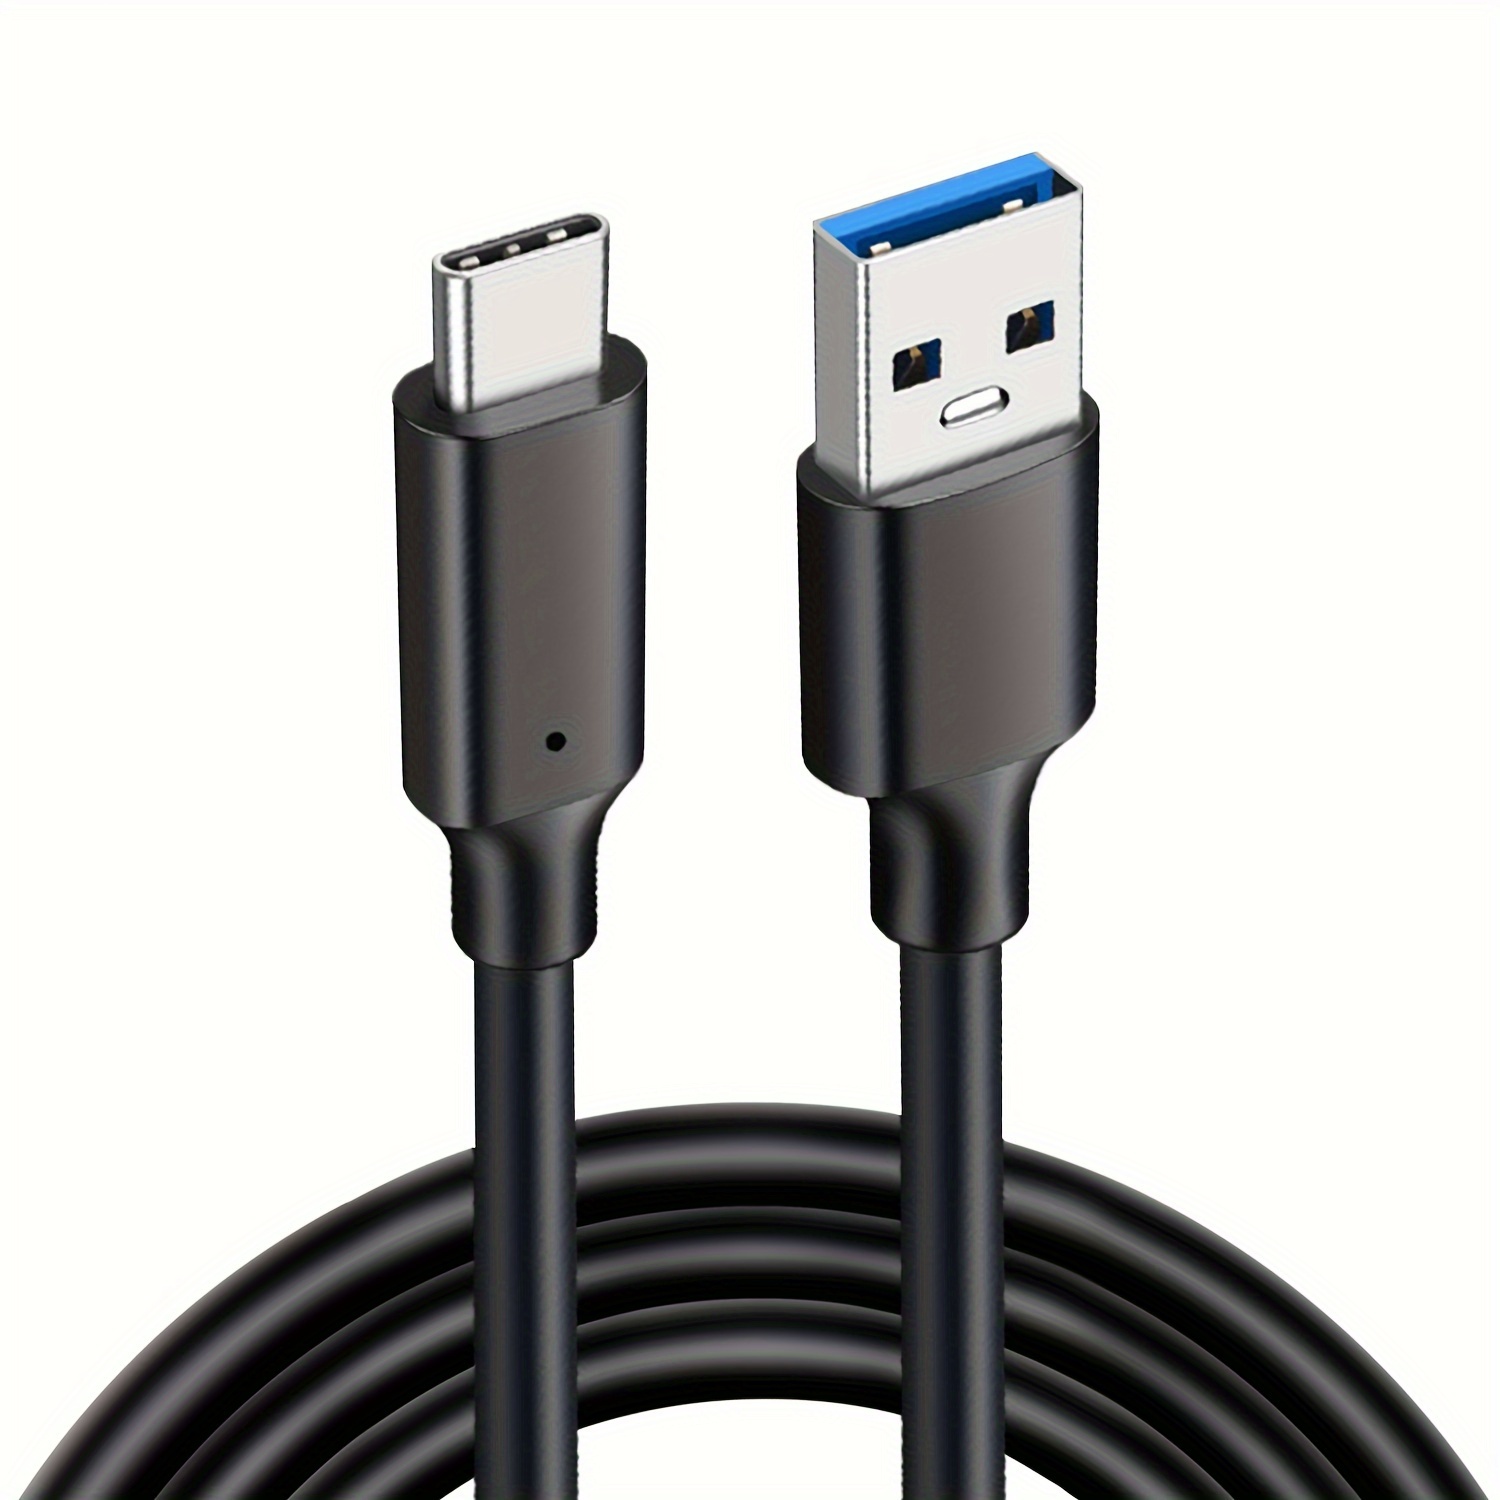 USB C 3.1 Gen 2 Cable 3FT, 10Gbps 18W USB A to C Android Auto